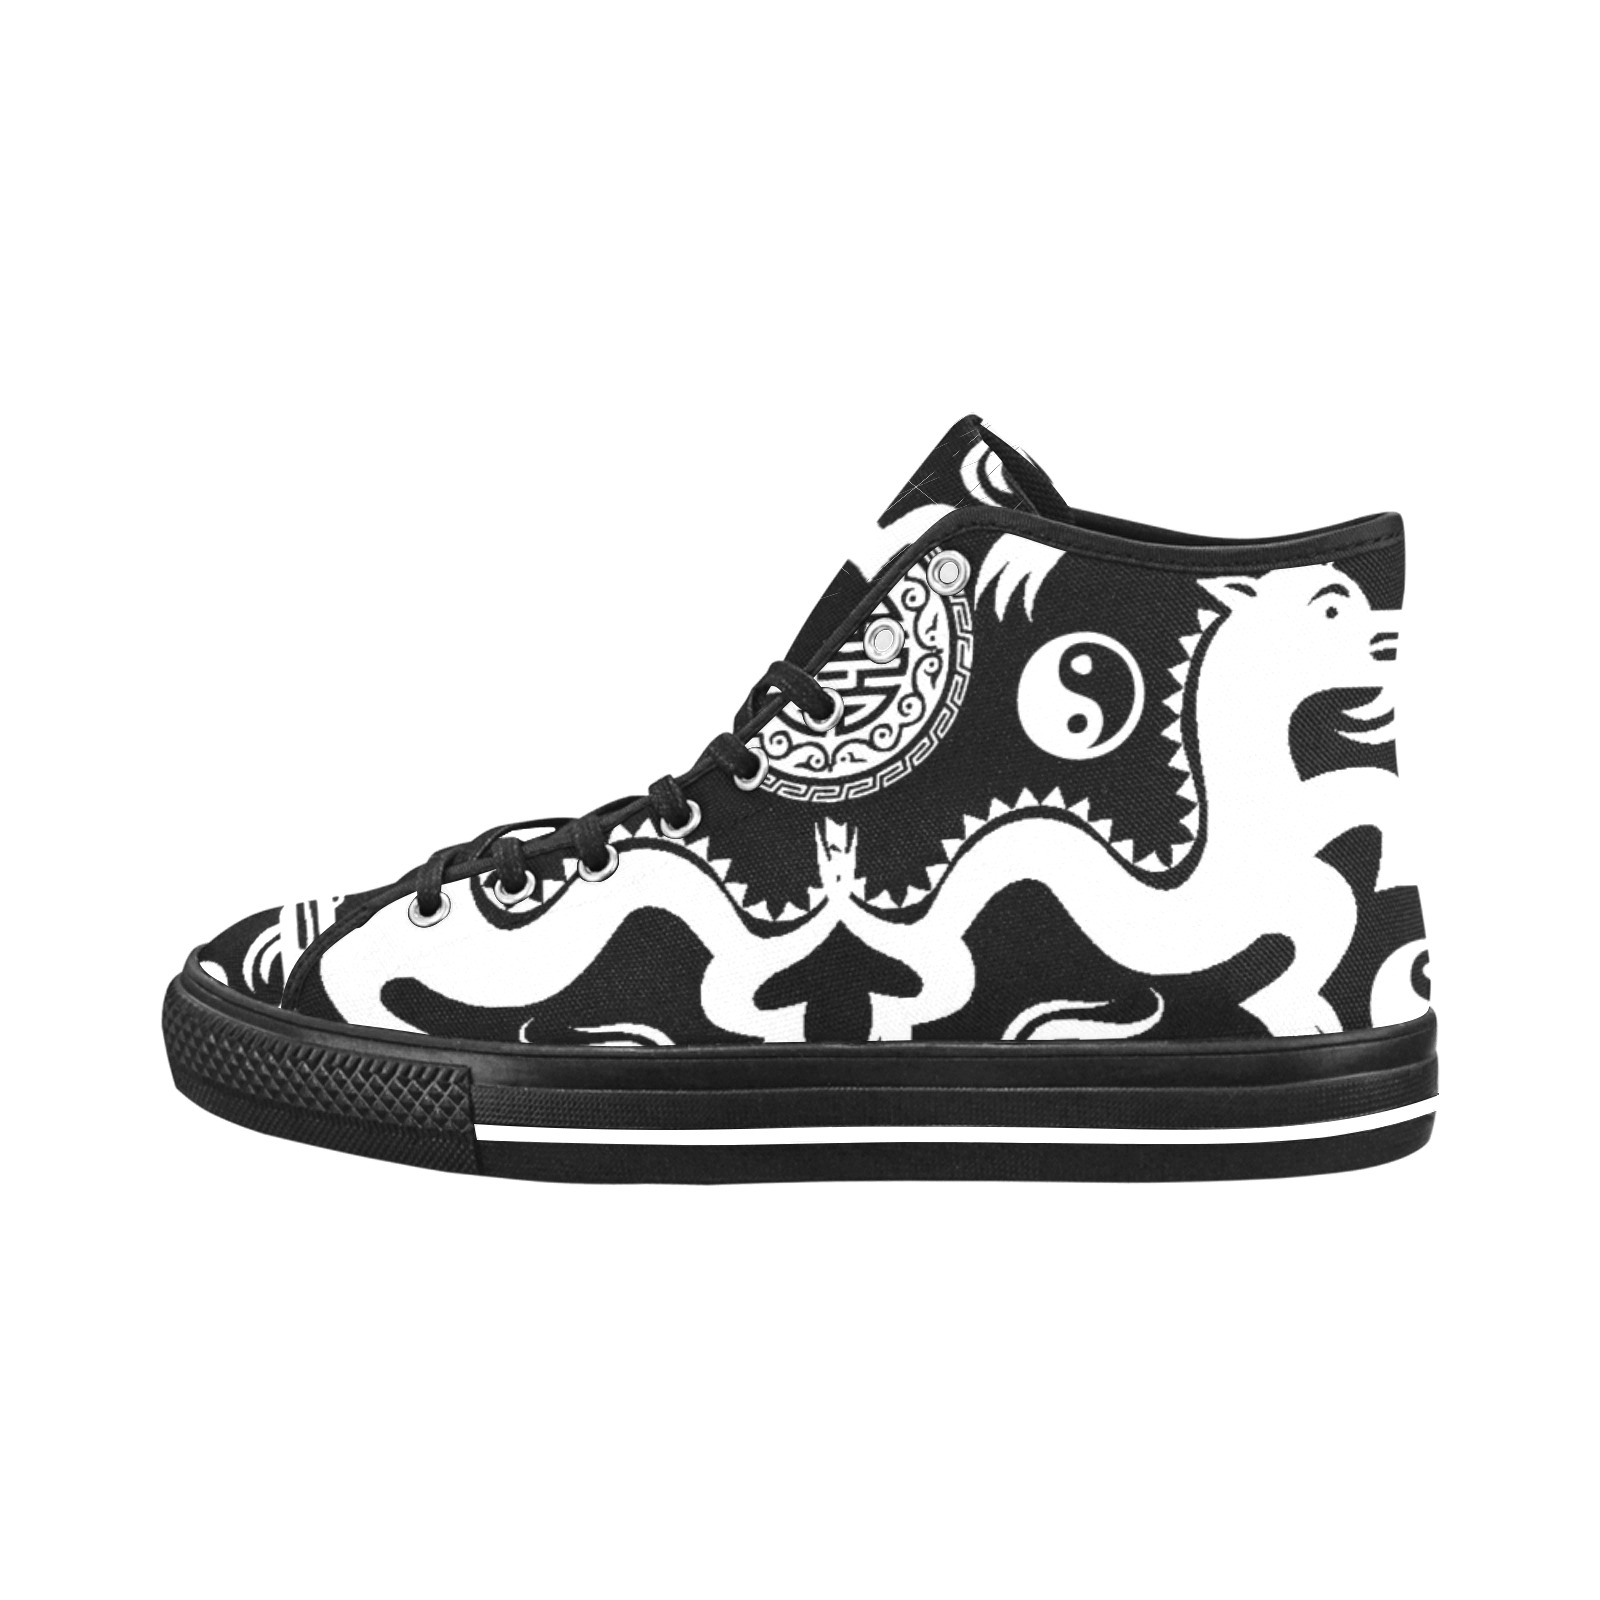 CHINESE DRAGONS Vancouver H Men's Canvas Shoes (1013-1)